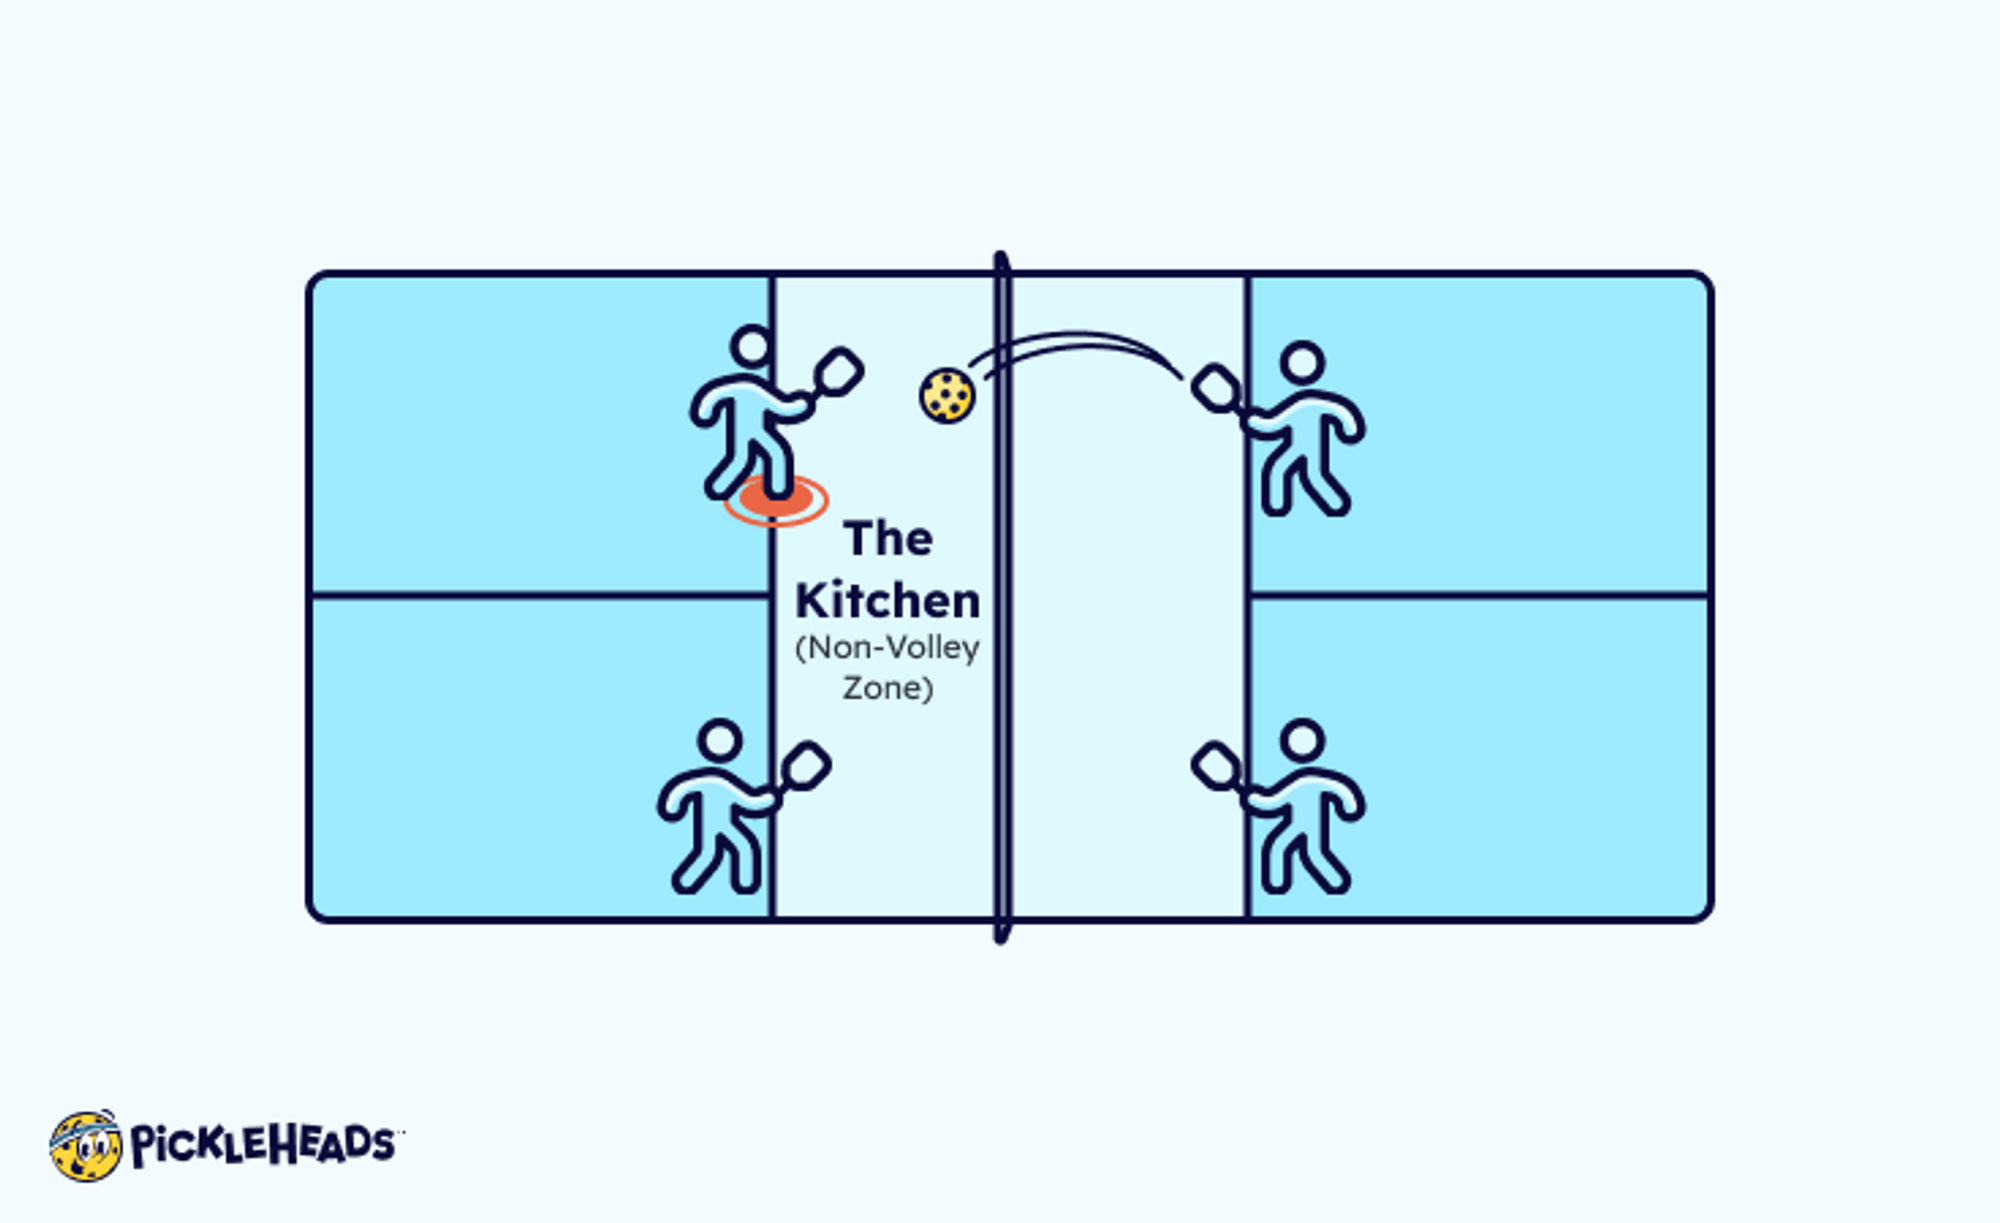 Graphic demonstrating the no volleying rule in the kitchen